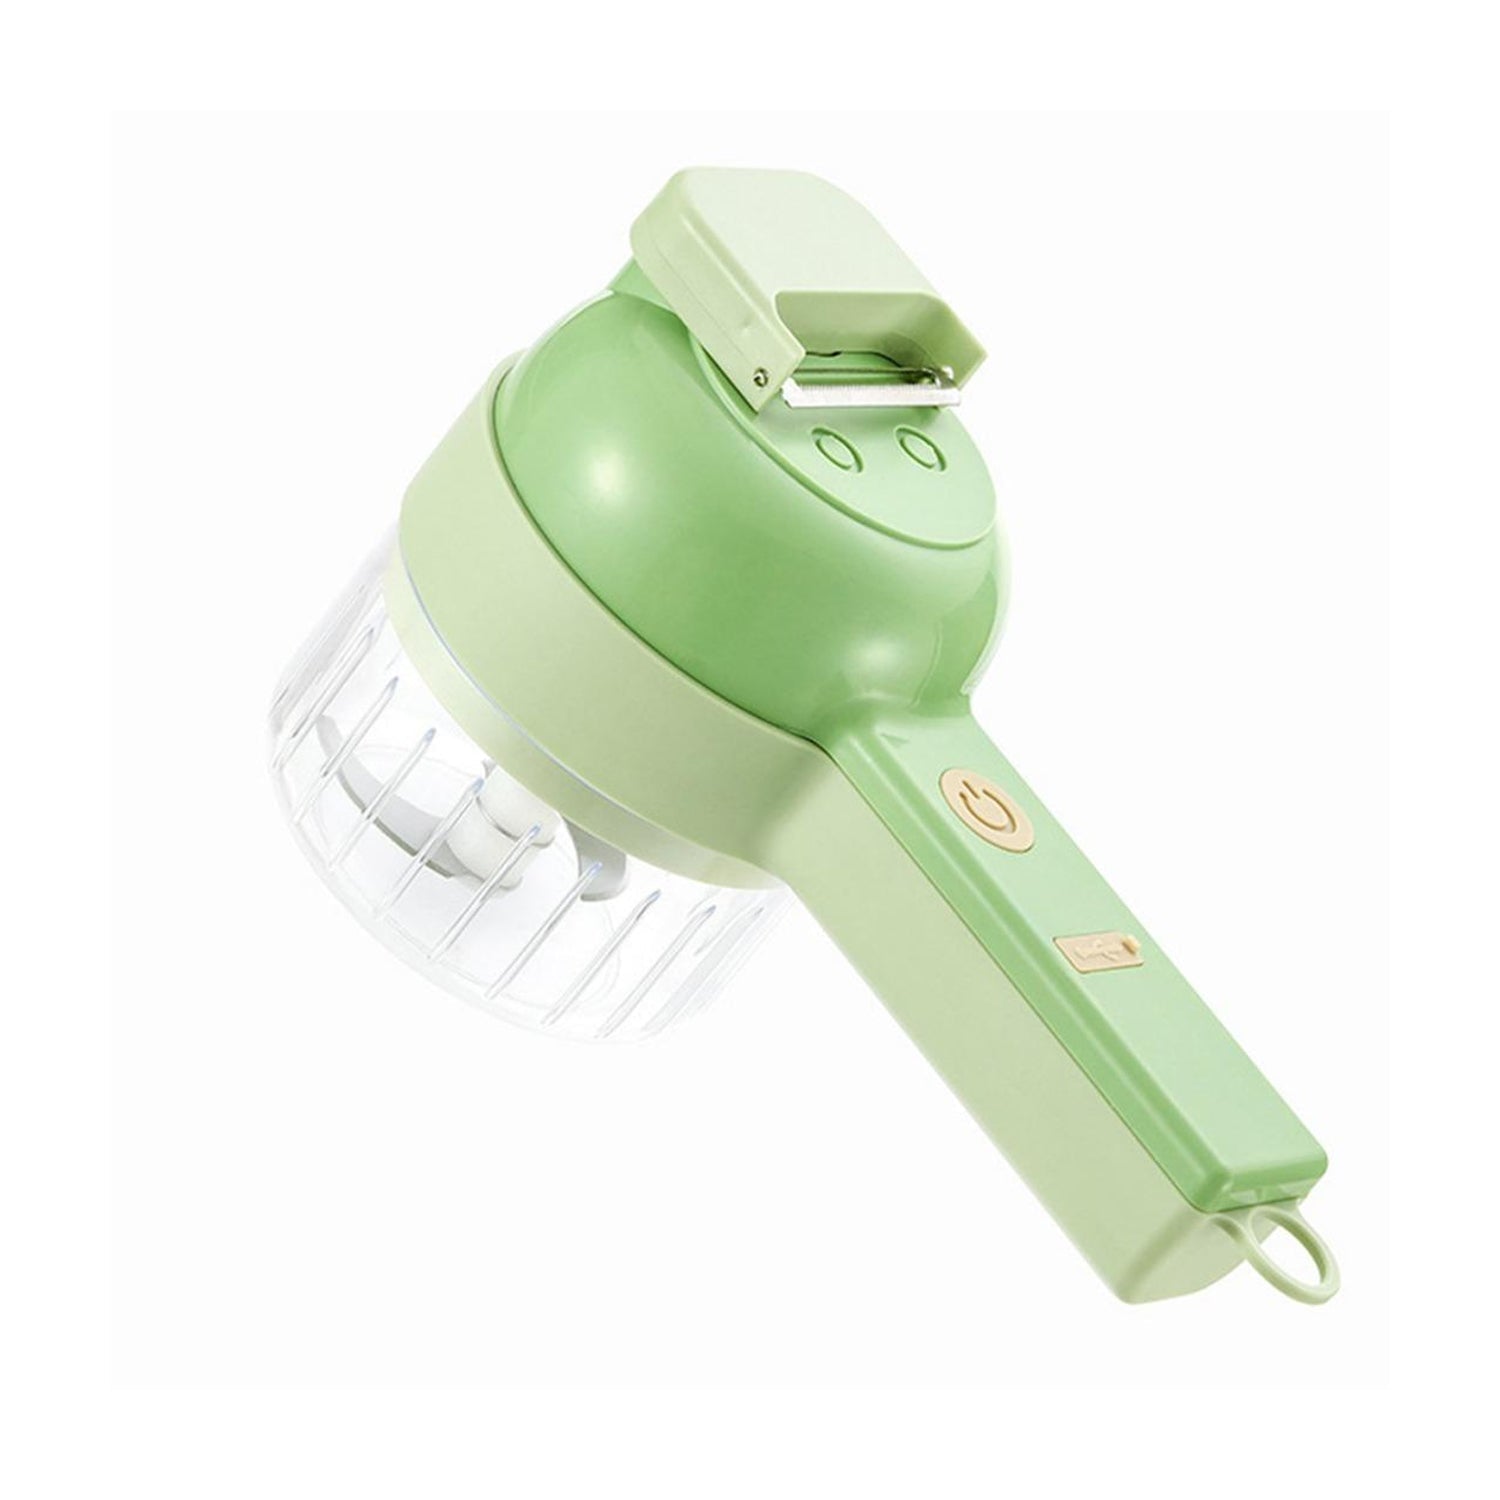 2284   4 in 1 Handheld Electric Vegetable Cutter Set, Multifunction Mini Chopper Food Processor, Wireless Electric Garlic Mud Masher, for Garlic, Chili ,Onion, Ginger 